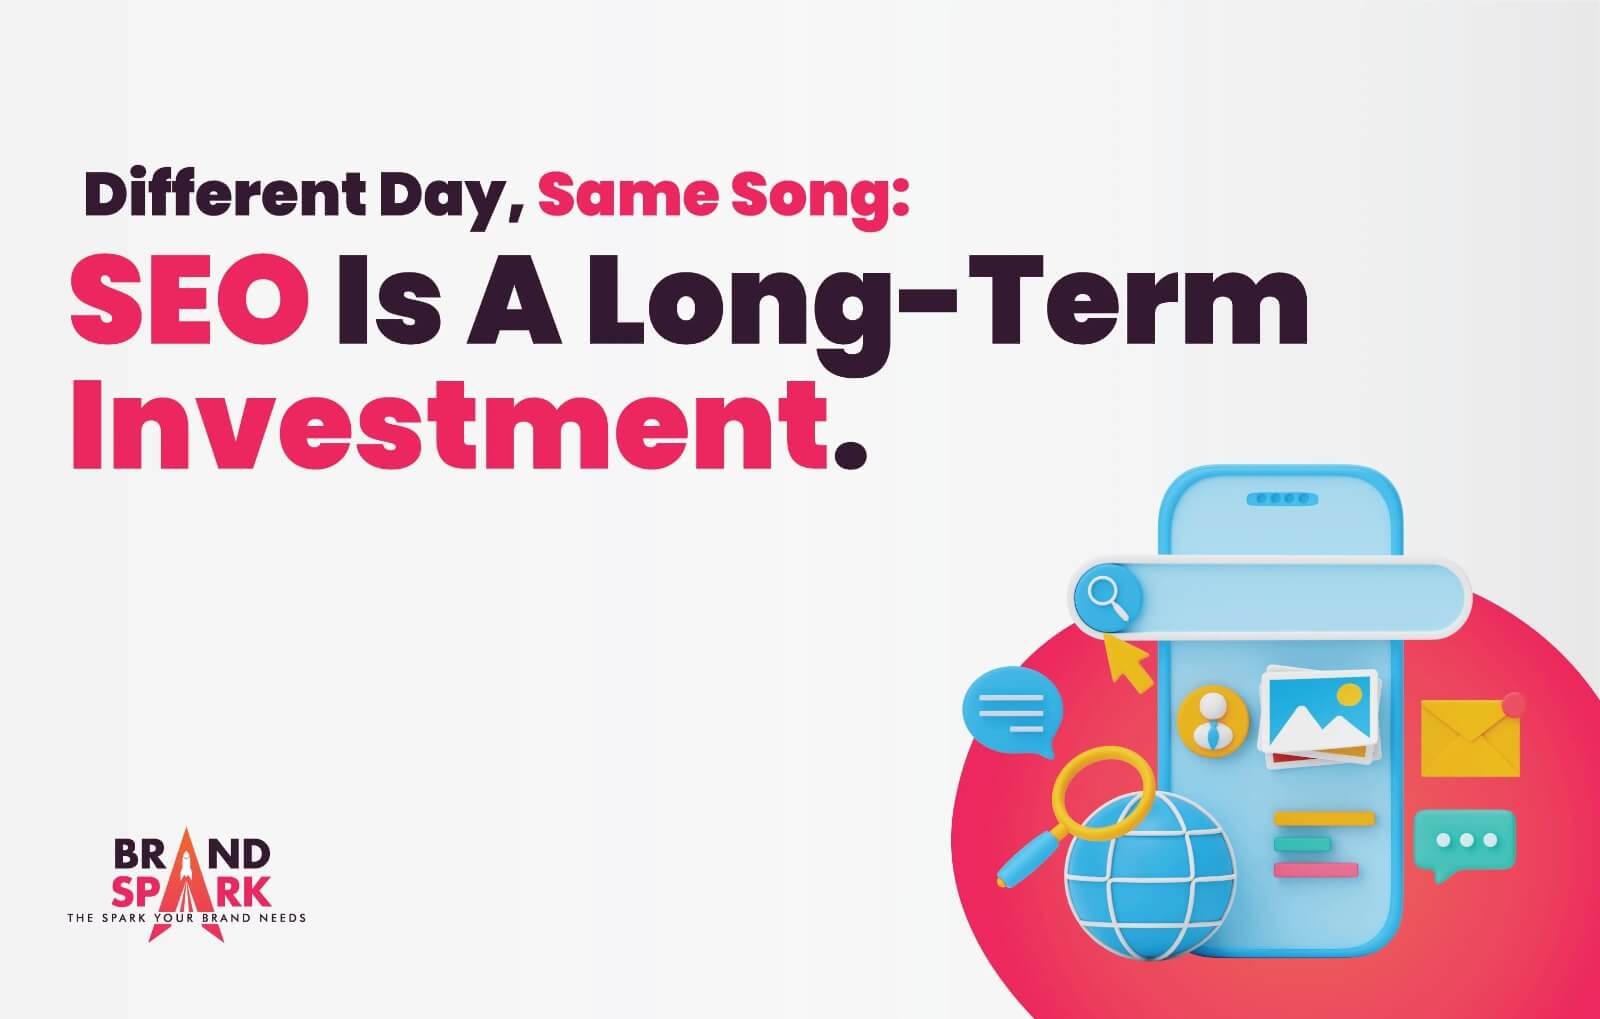 Different Day, Same Song: SEO Is a Long-Term Investment